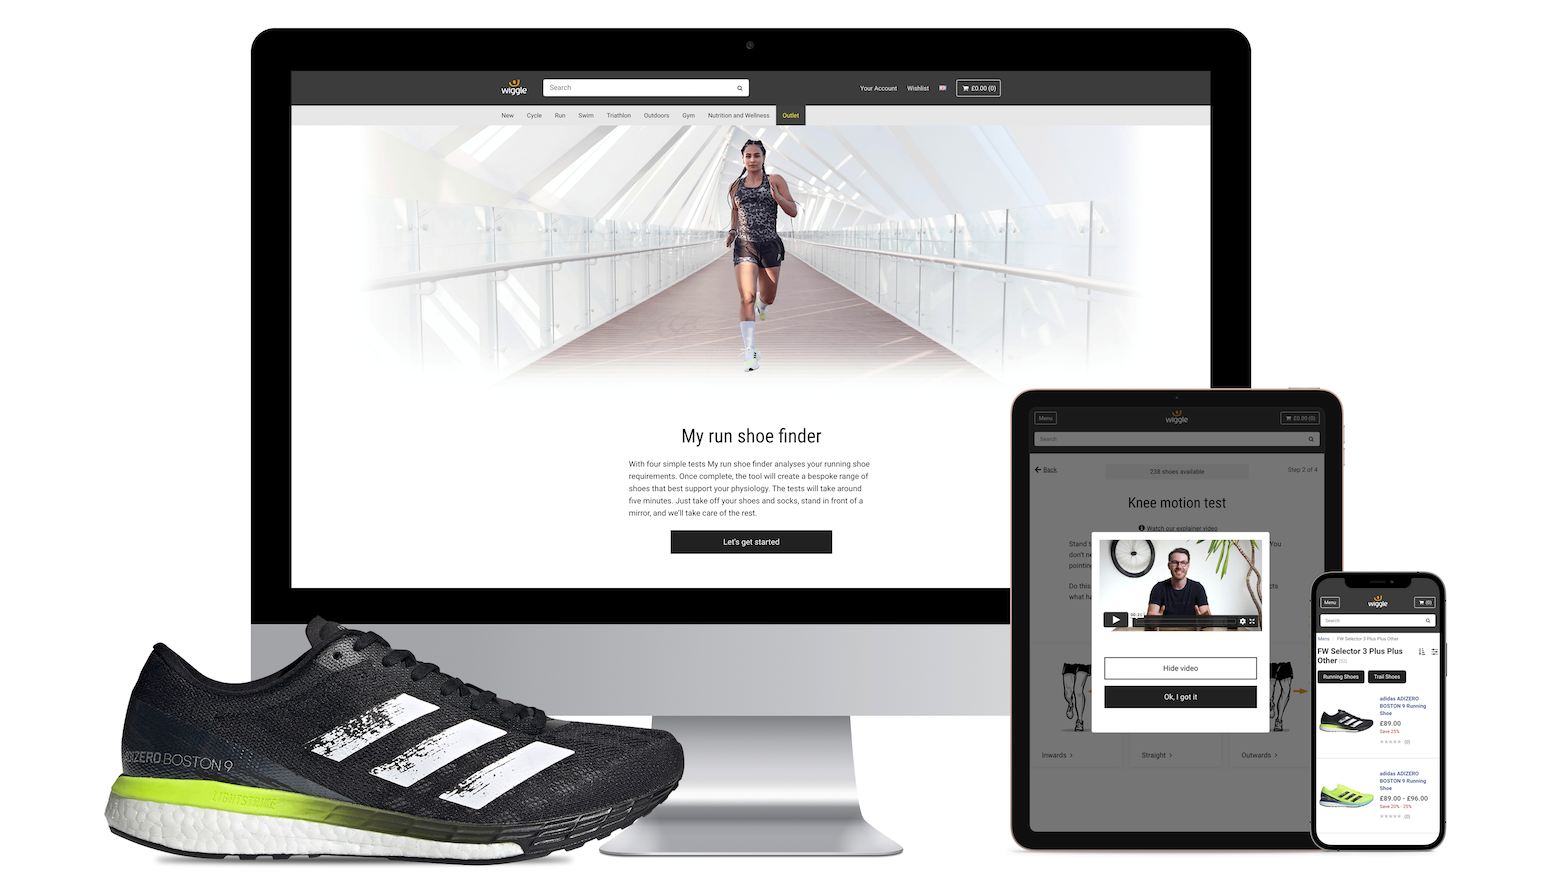 This online tool will help you choose the perfect pair of running shoes